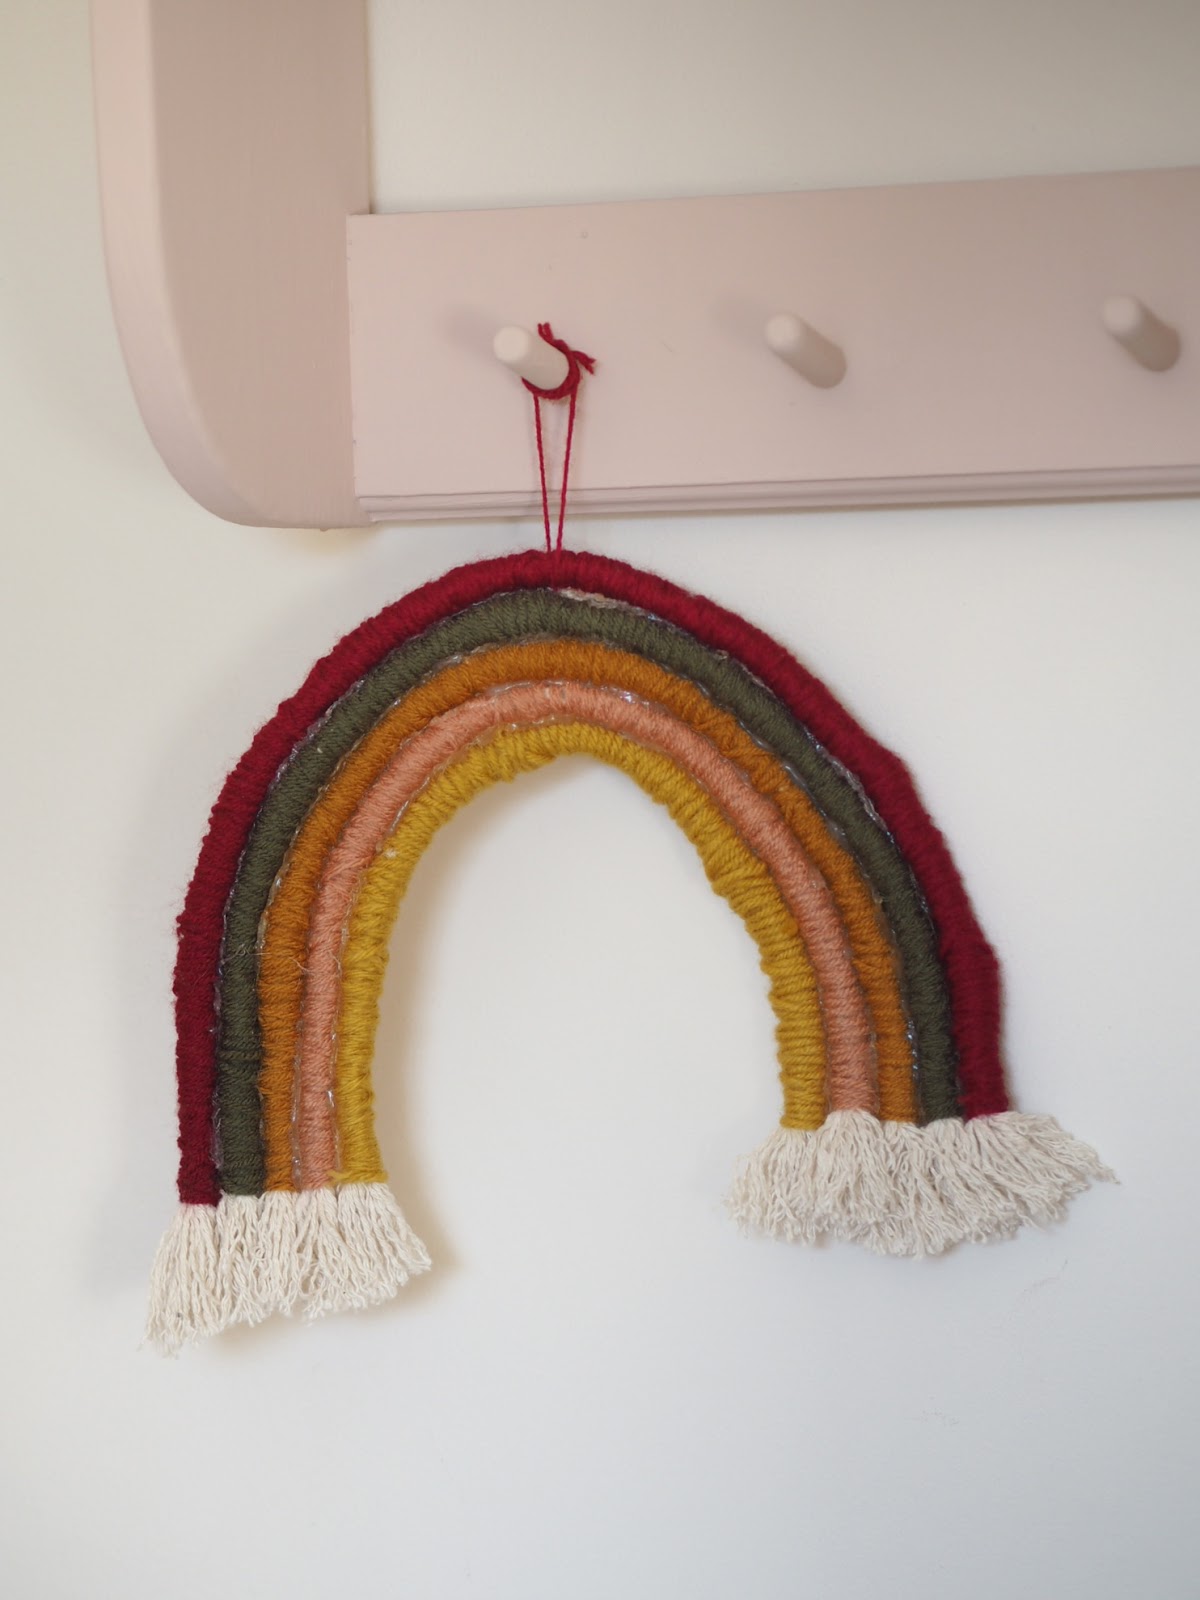 DIY crafting tutorial on how to make a rope yarn rainbow shaped wall hanging, perfect for a Childs nursery or playroom. Crafting project using wool, glue glue, rope, wire. Simple crafting project perfect for beginners